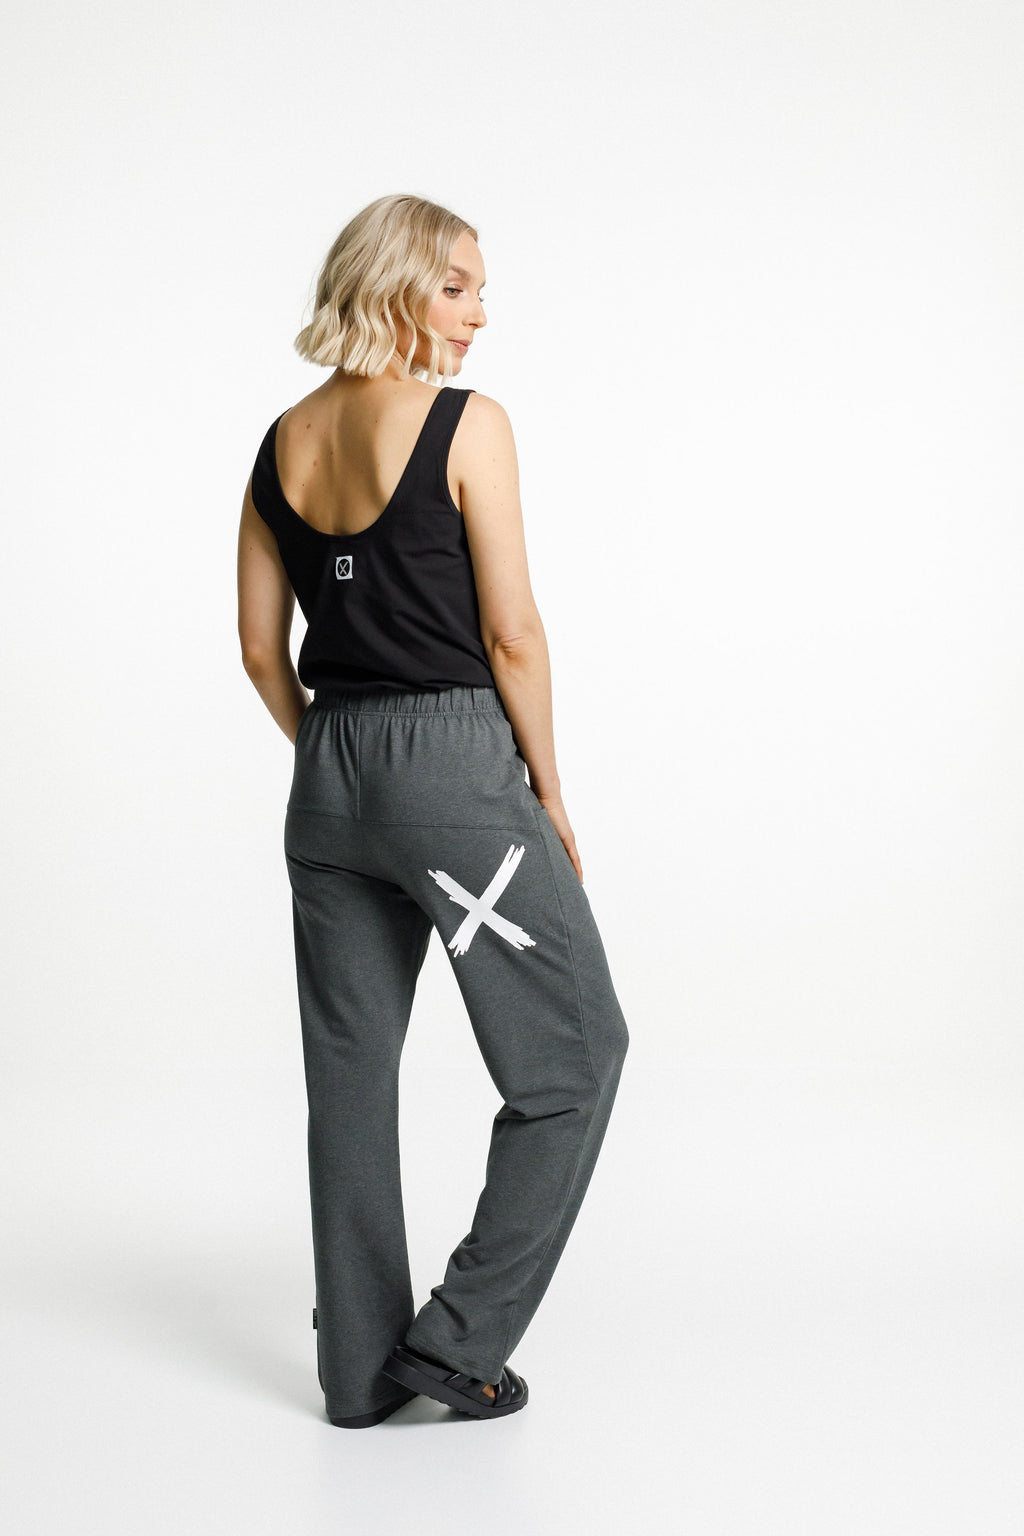 Avenue Pants - Winter Weight - Charcoal with White X